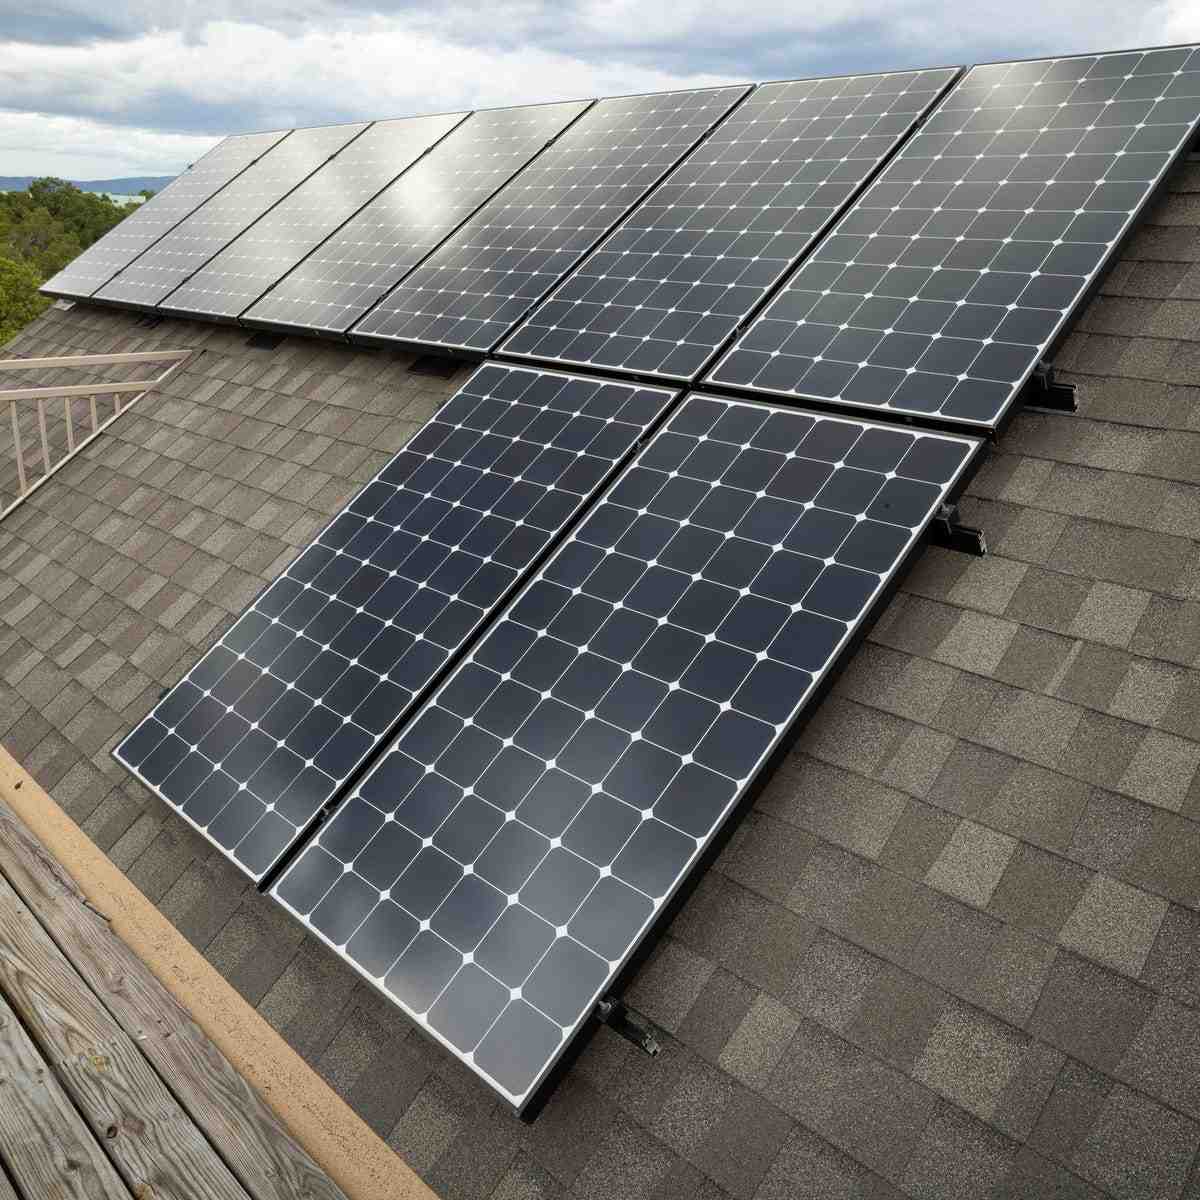 How big is a 1 kWh solar panel?